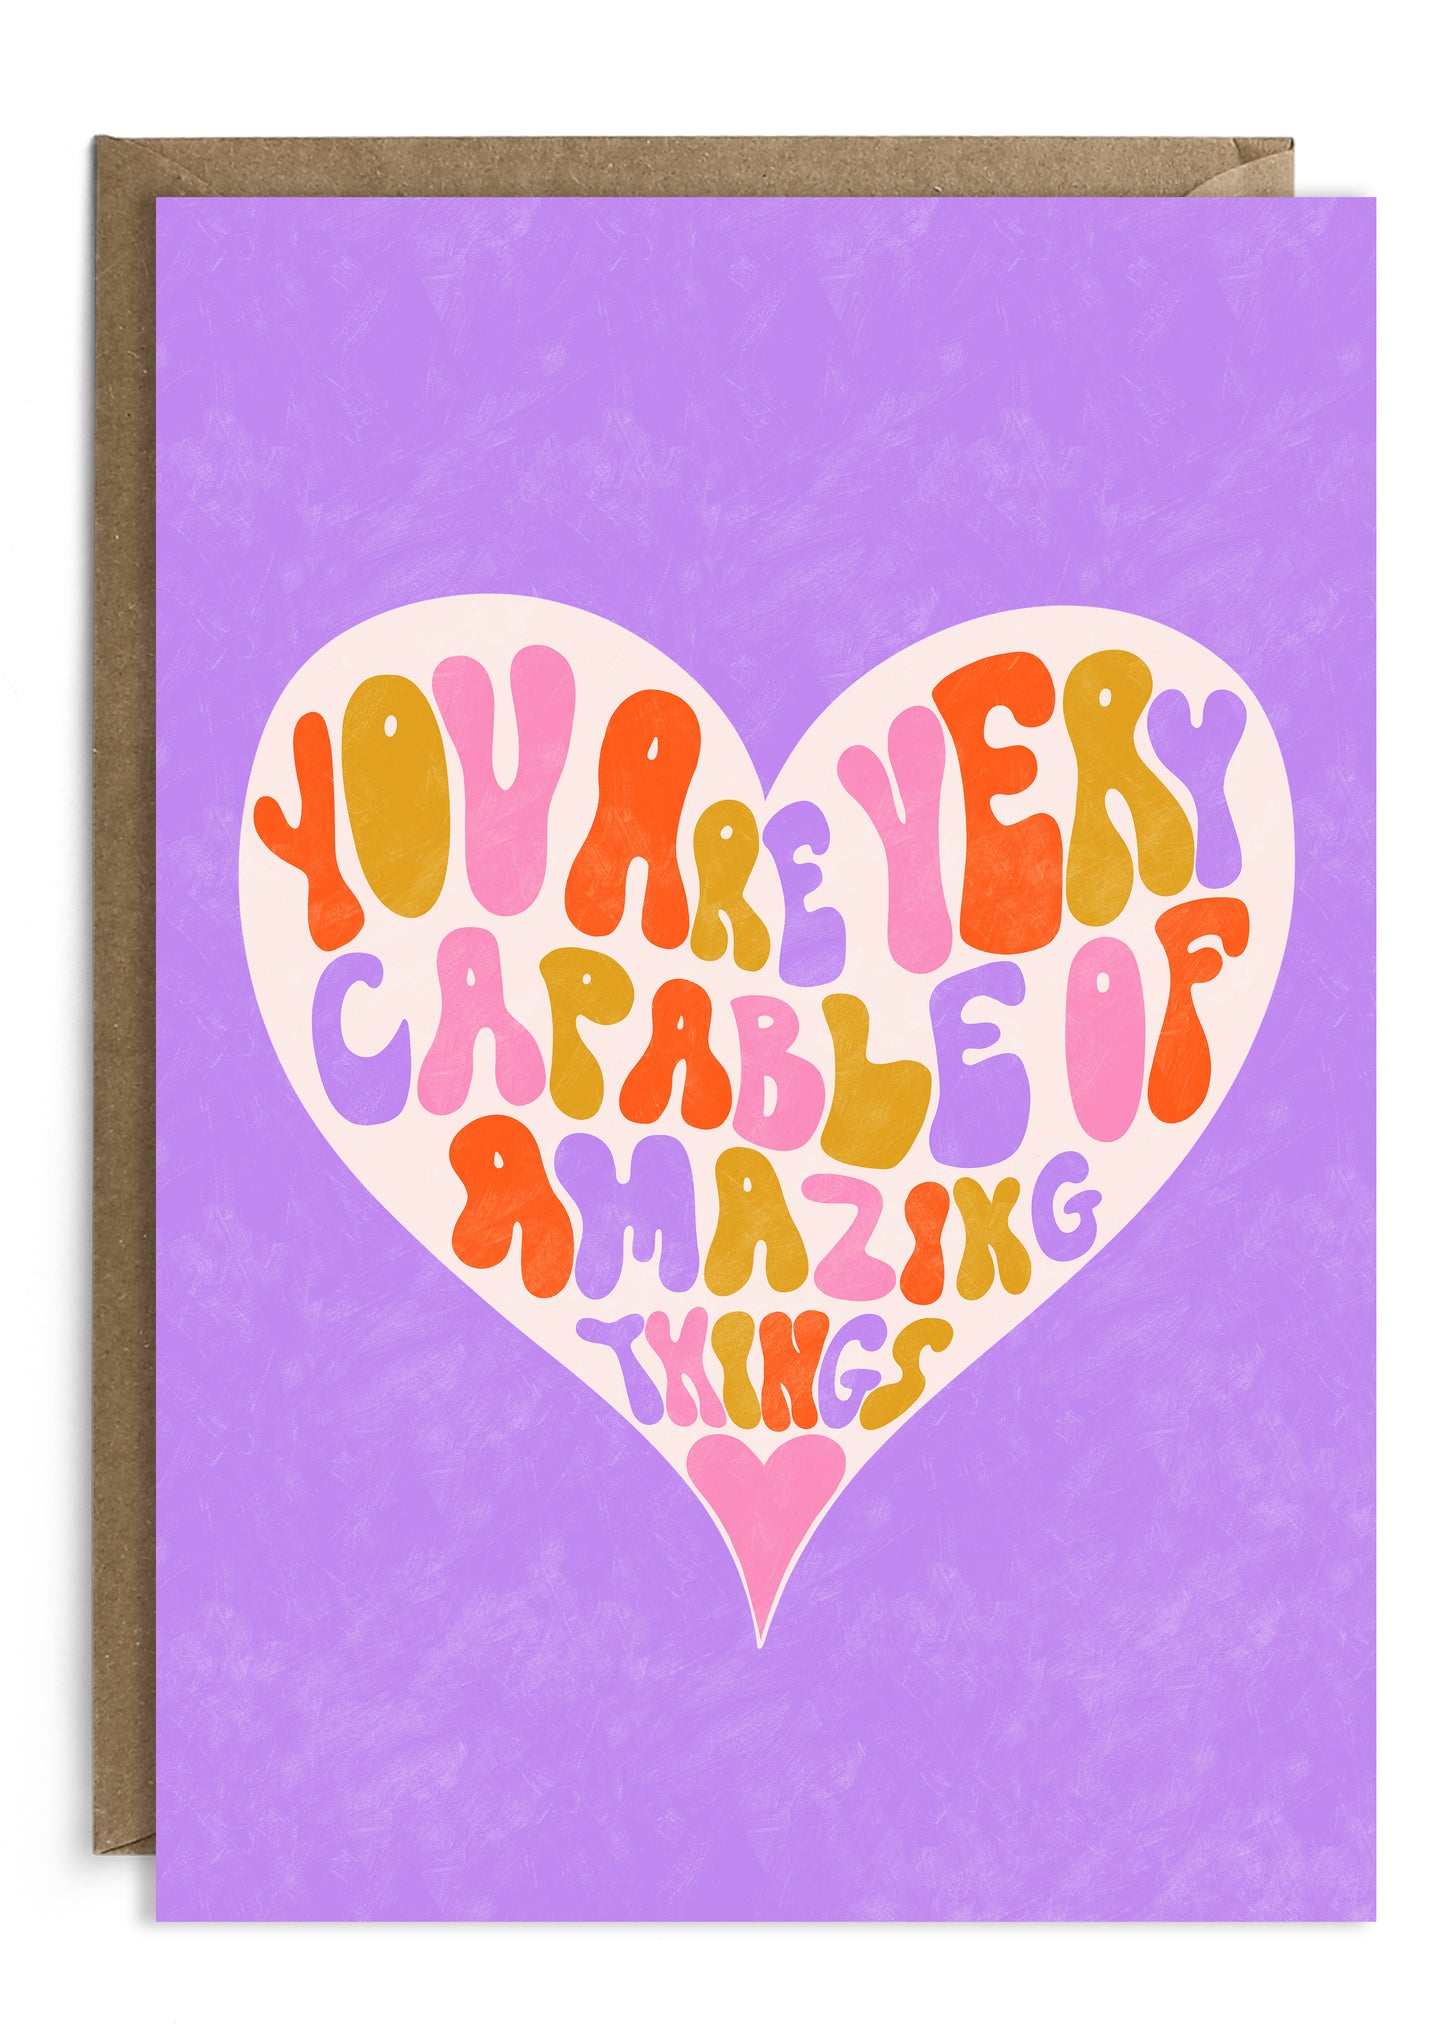 You Are Very Capable of Amazing Things | Good Luck Card | Encouragement Card